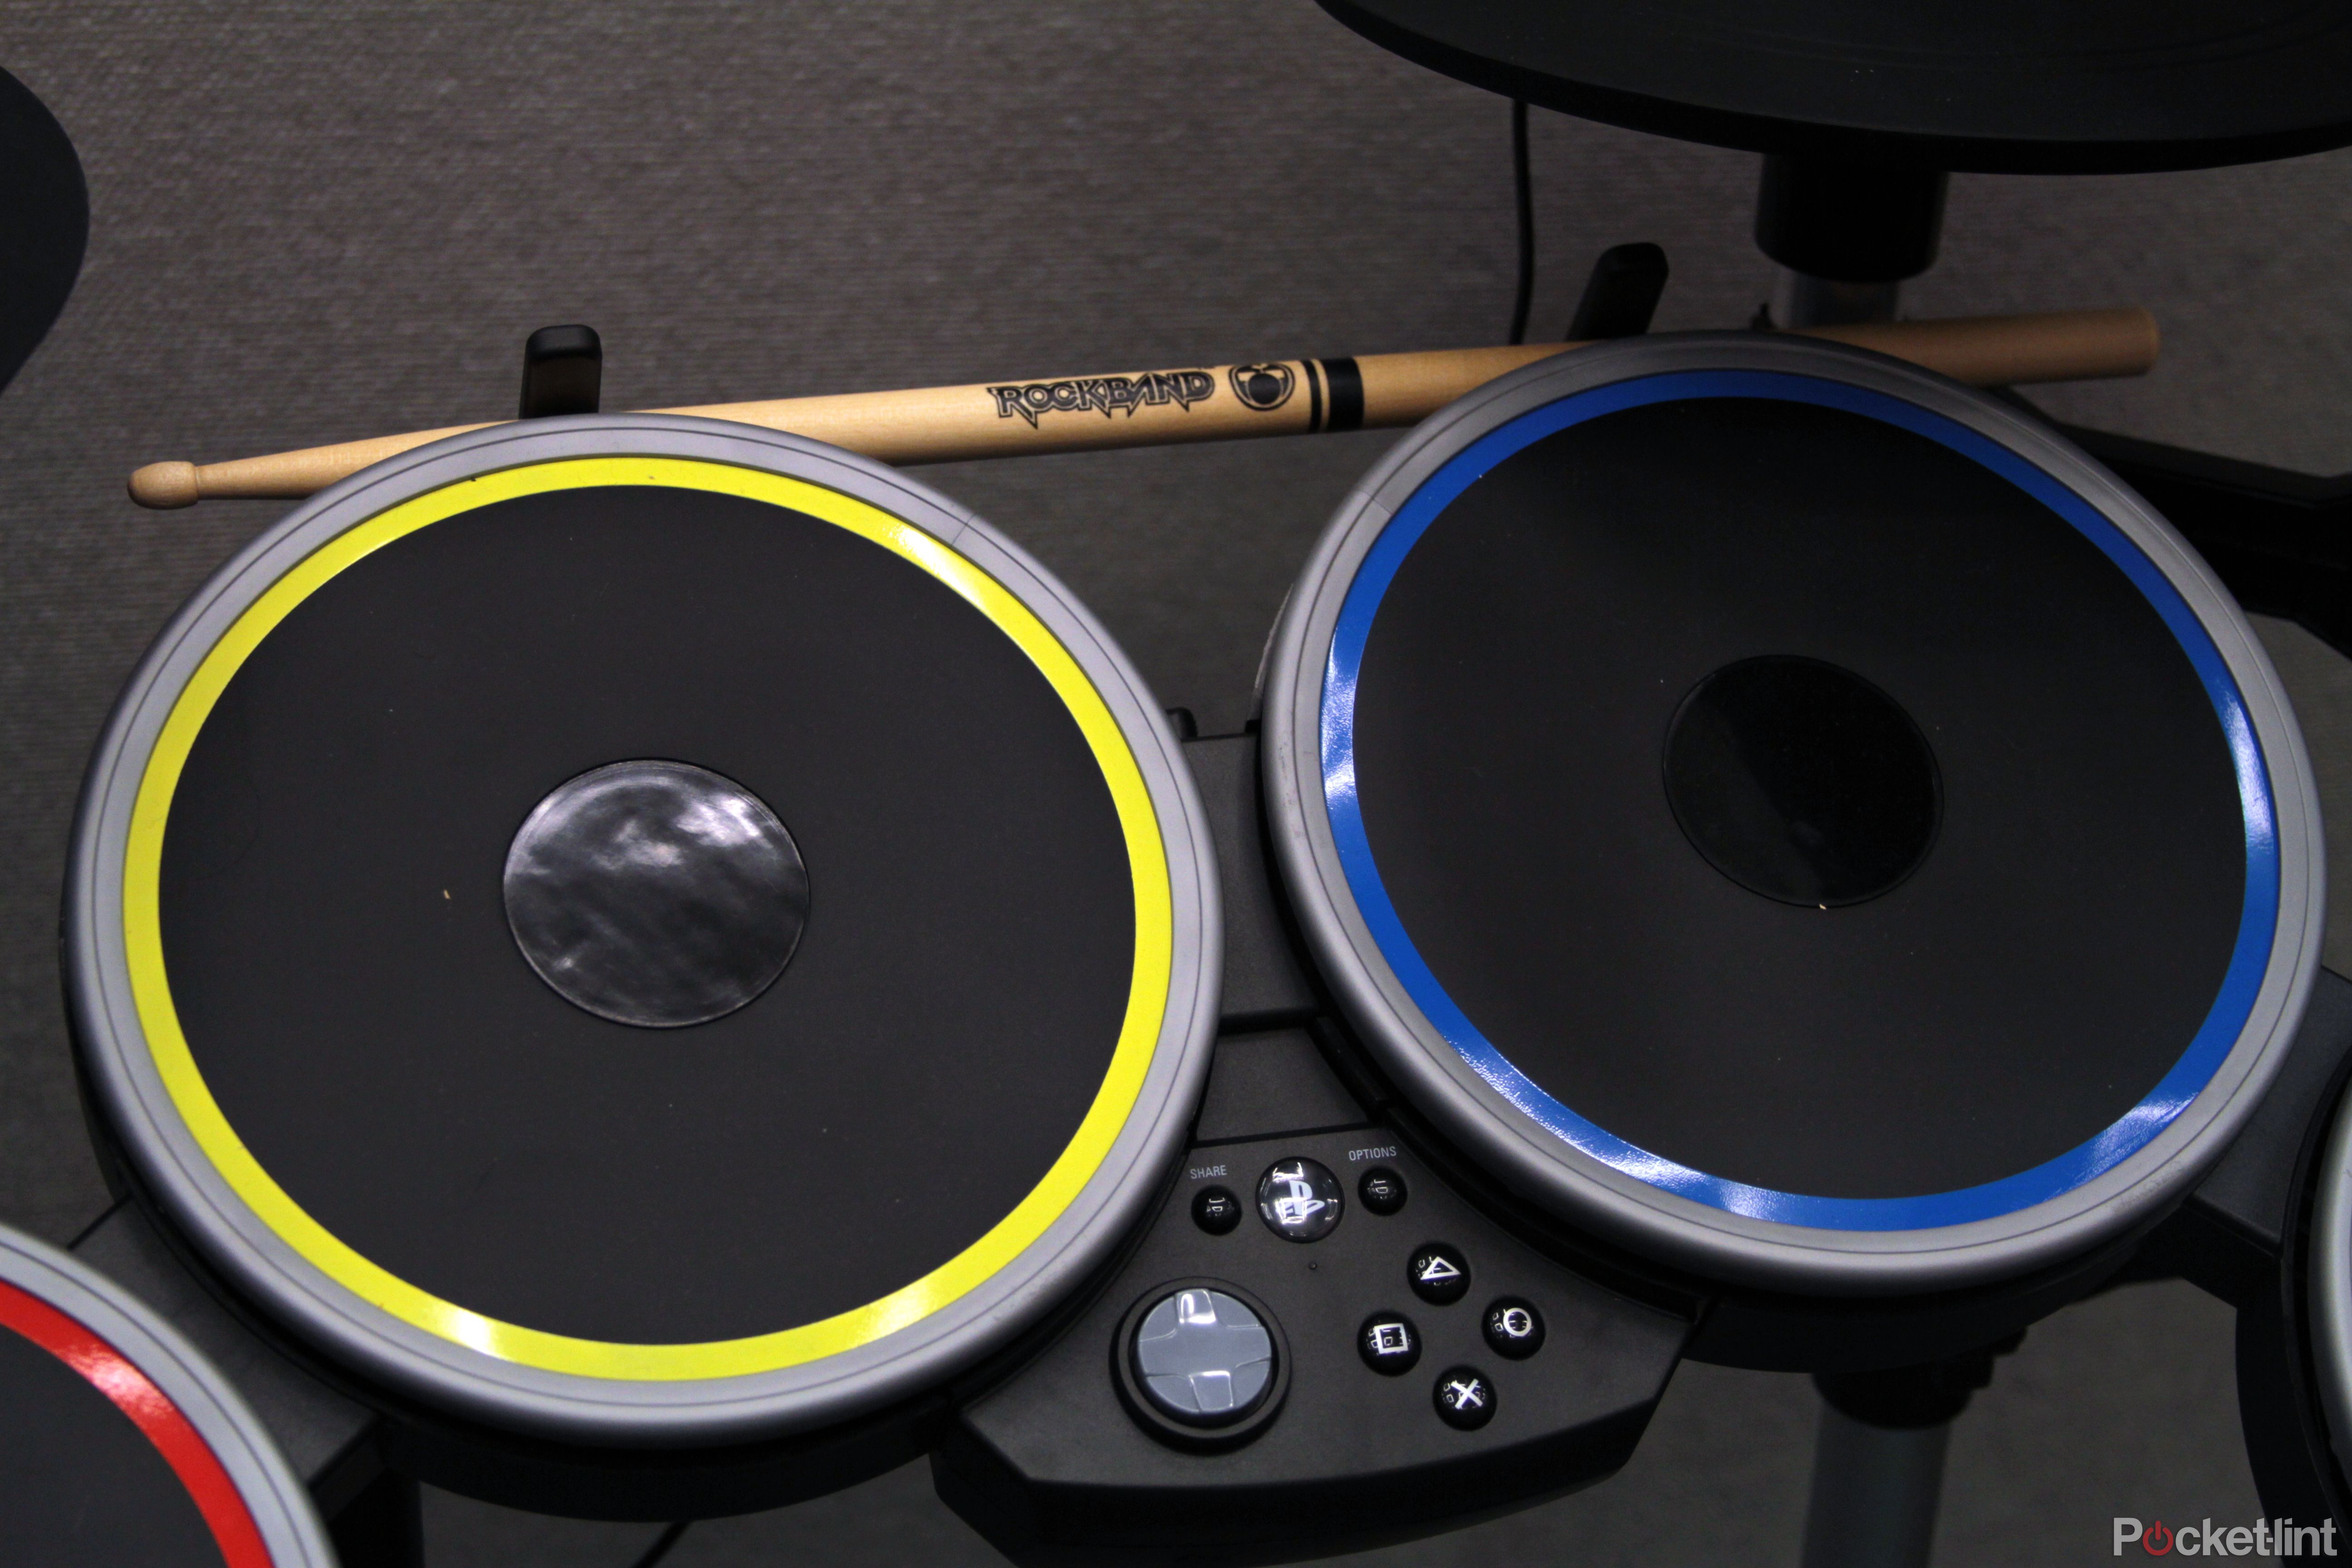 rock band 4 preview freestyle guitar solos and the new mad catz controllers hands on image 15